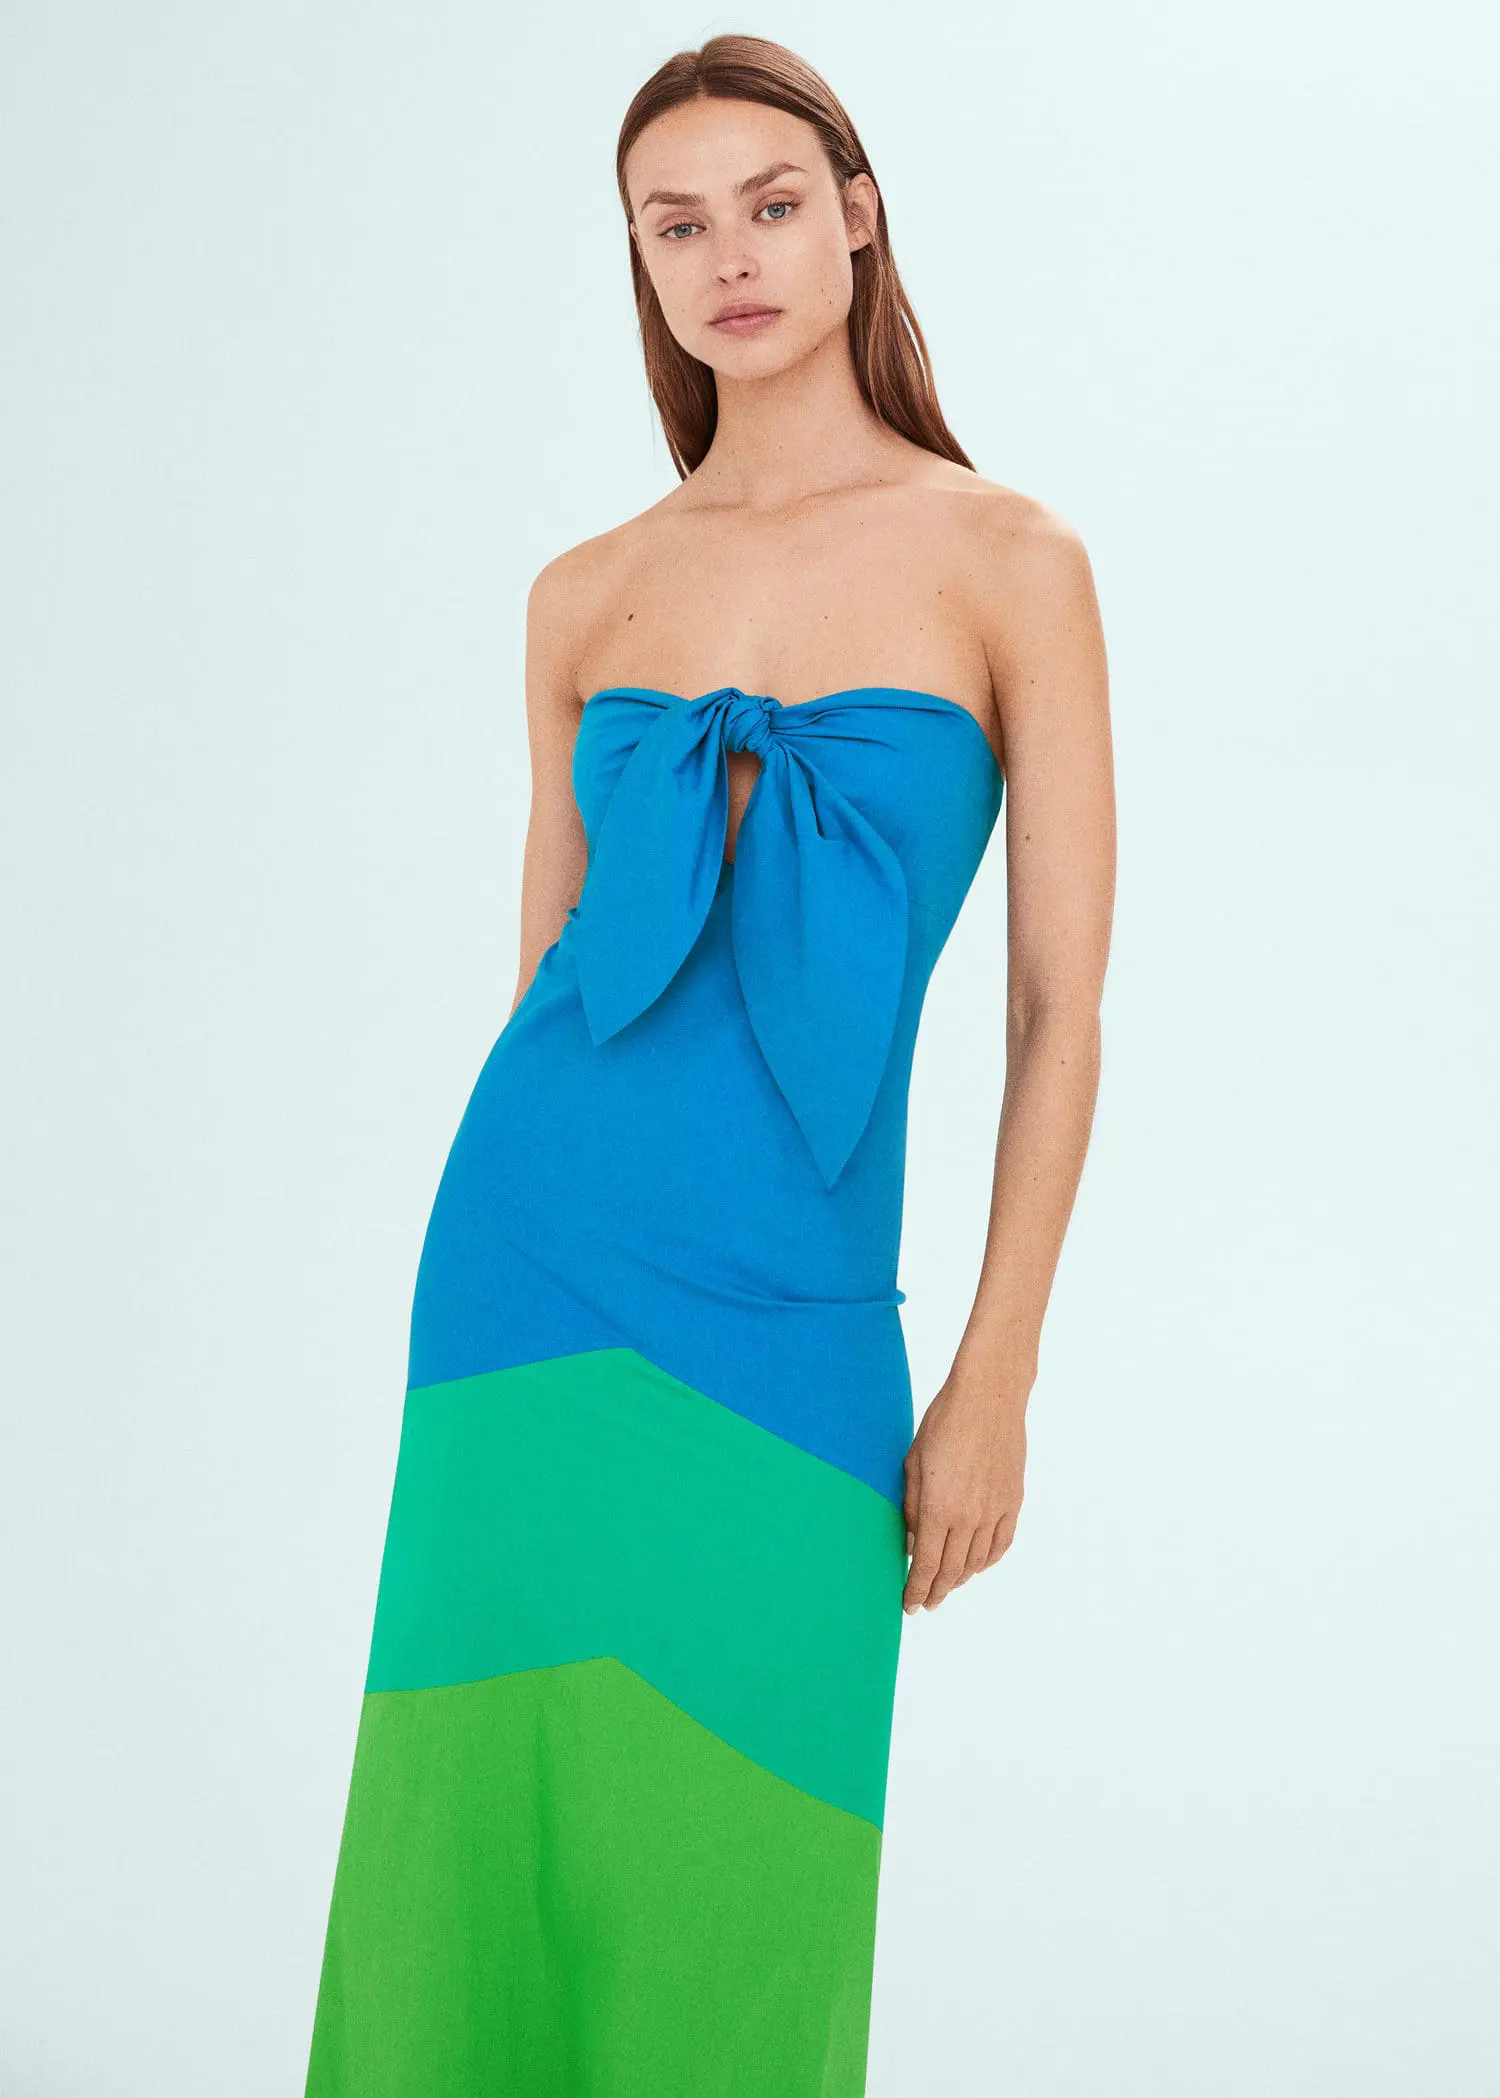 Mango Multi-colored dress with knot neckline. a woman wearing a blue and green dress. 